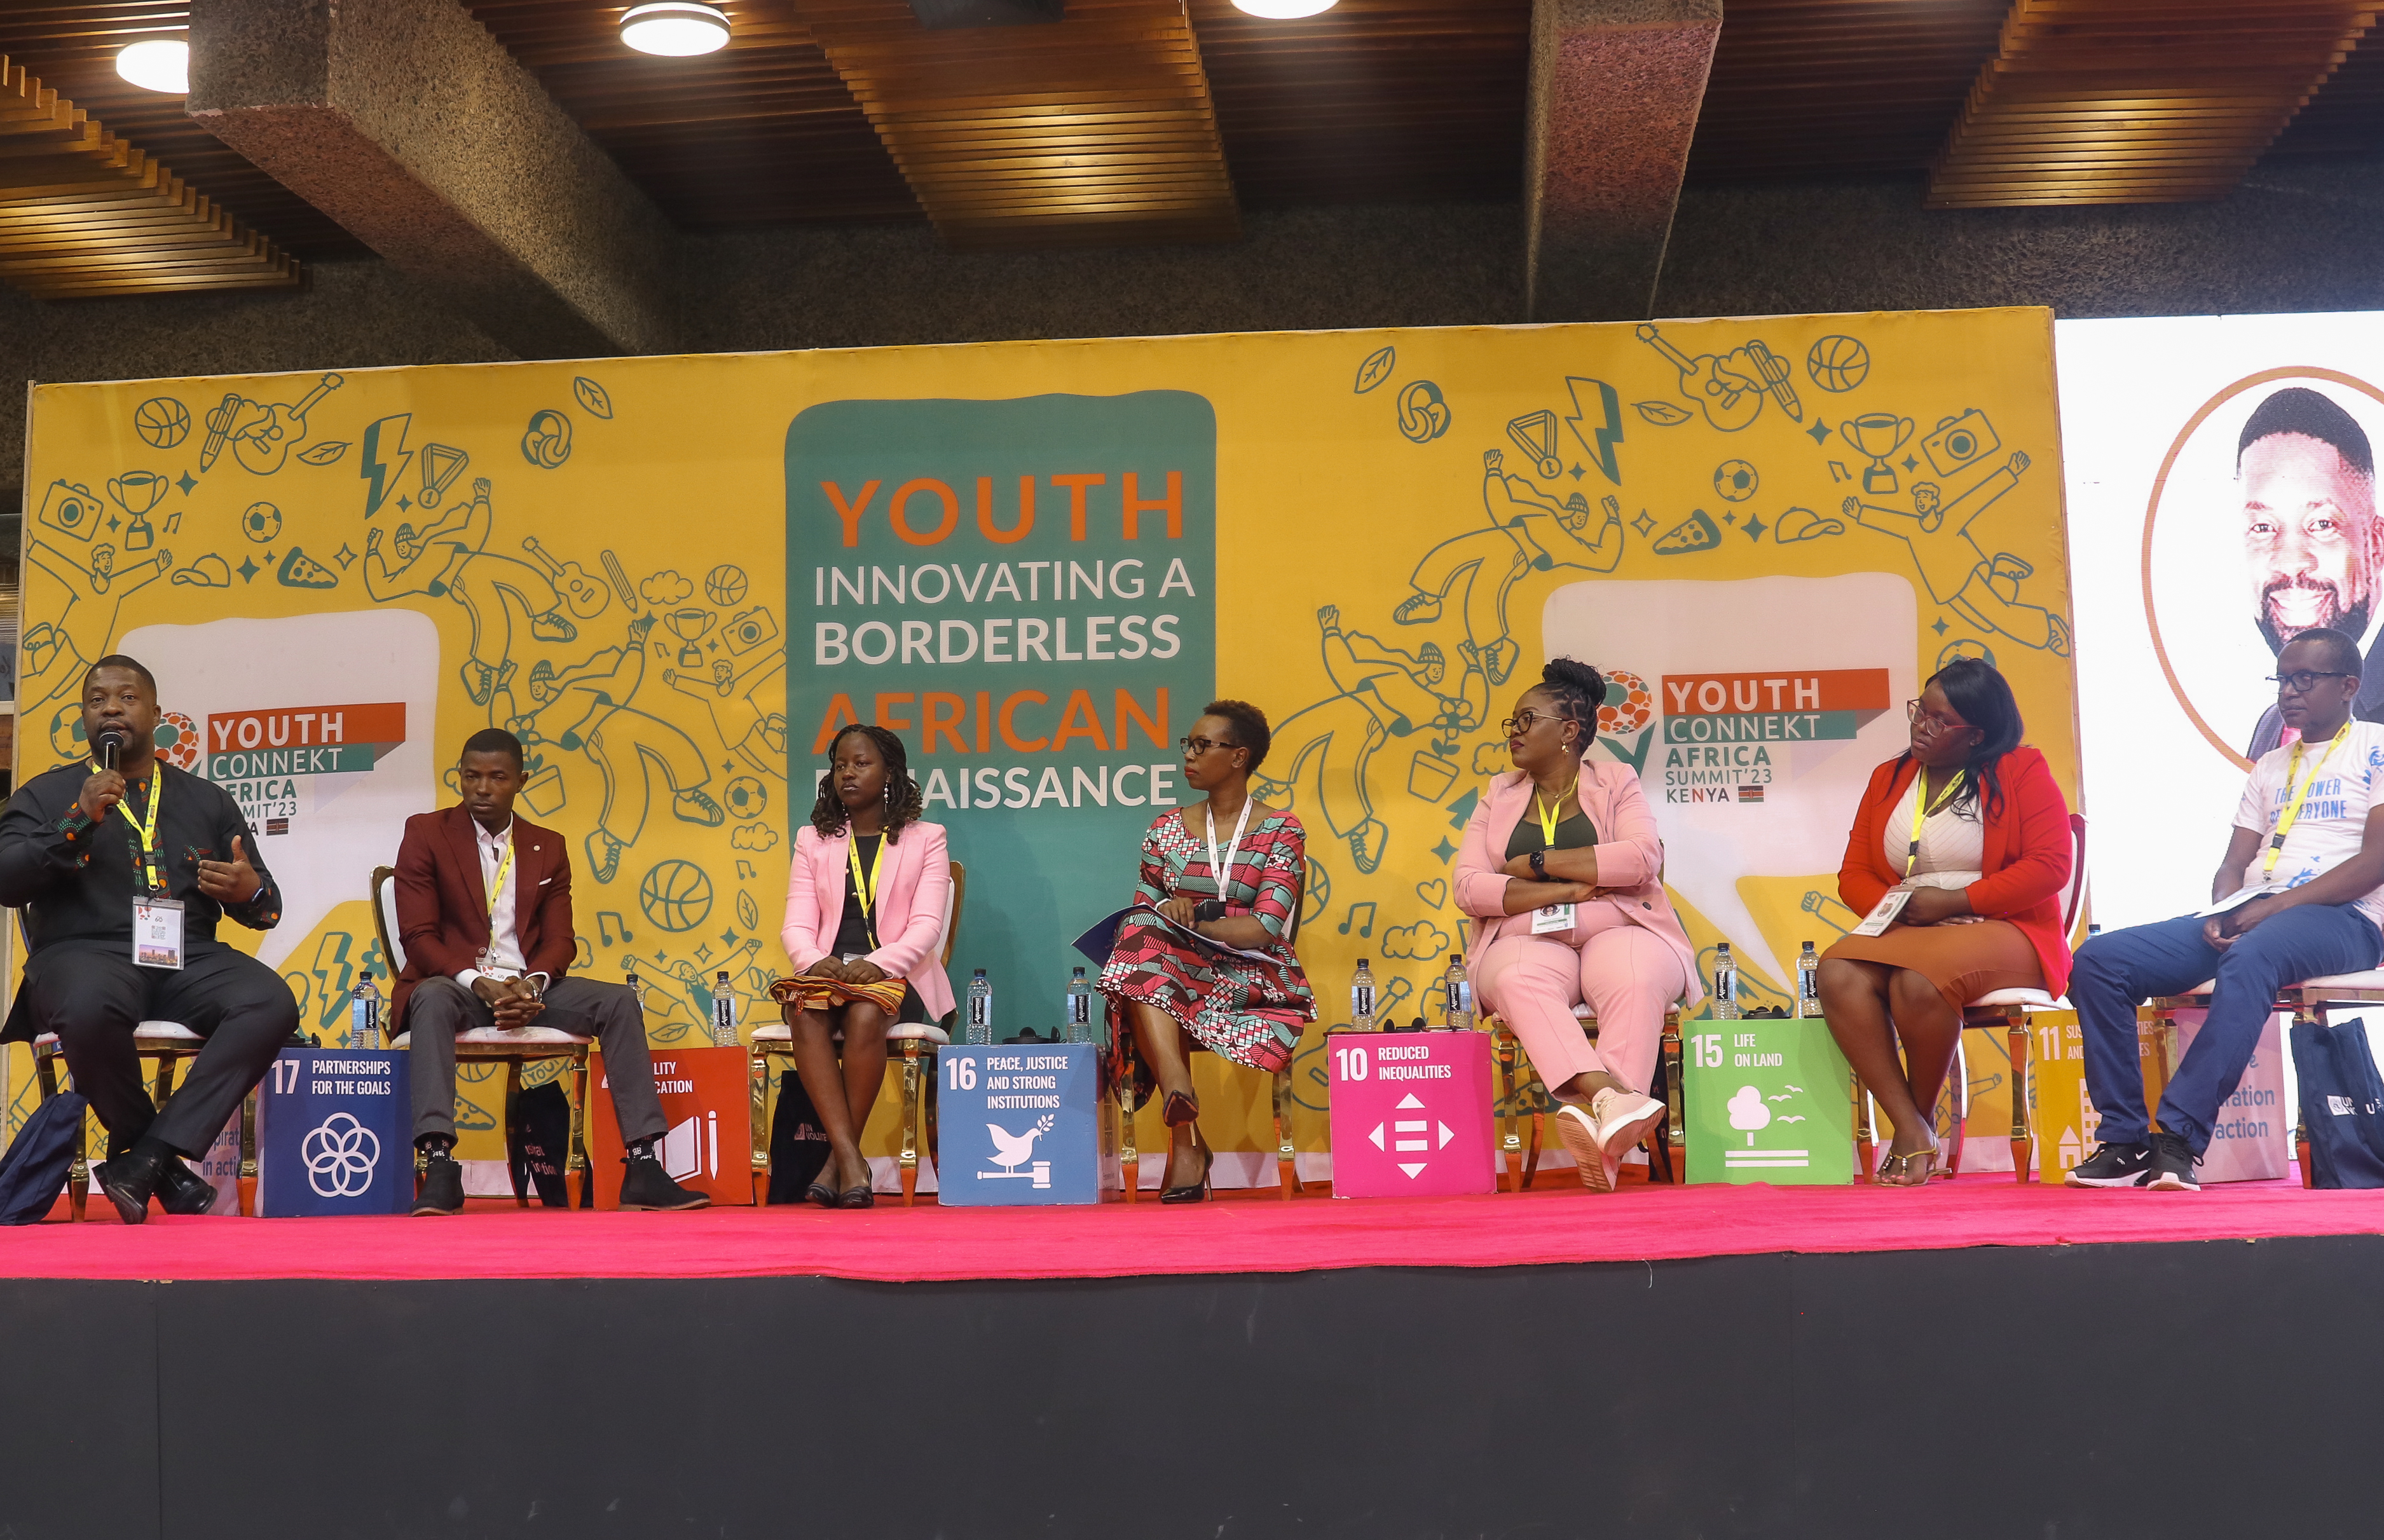 An image of speakers at a UNV panel in Youth Connects Africa